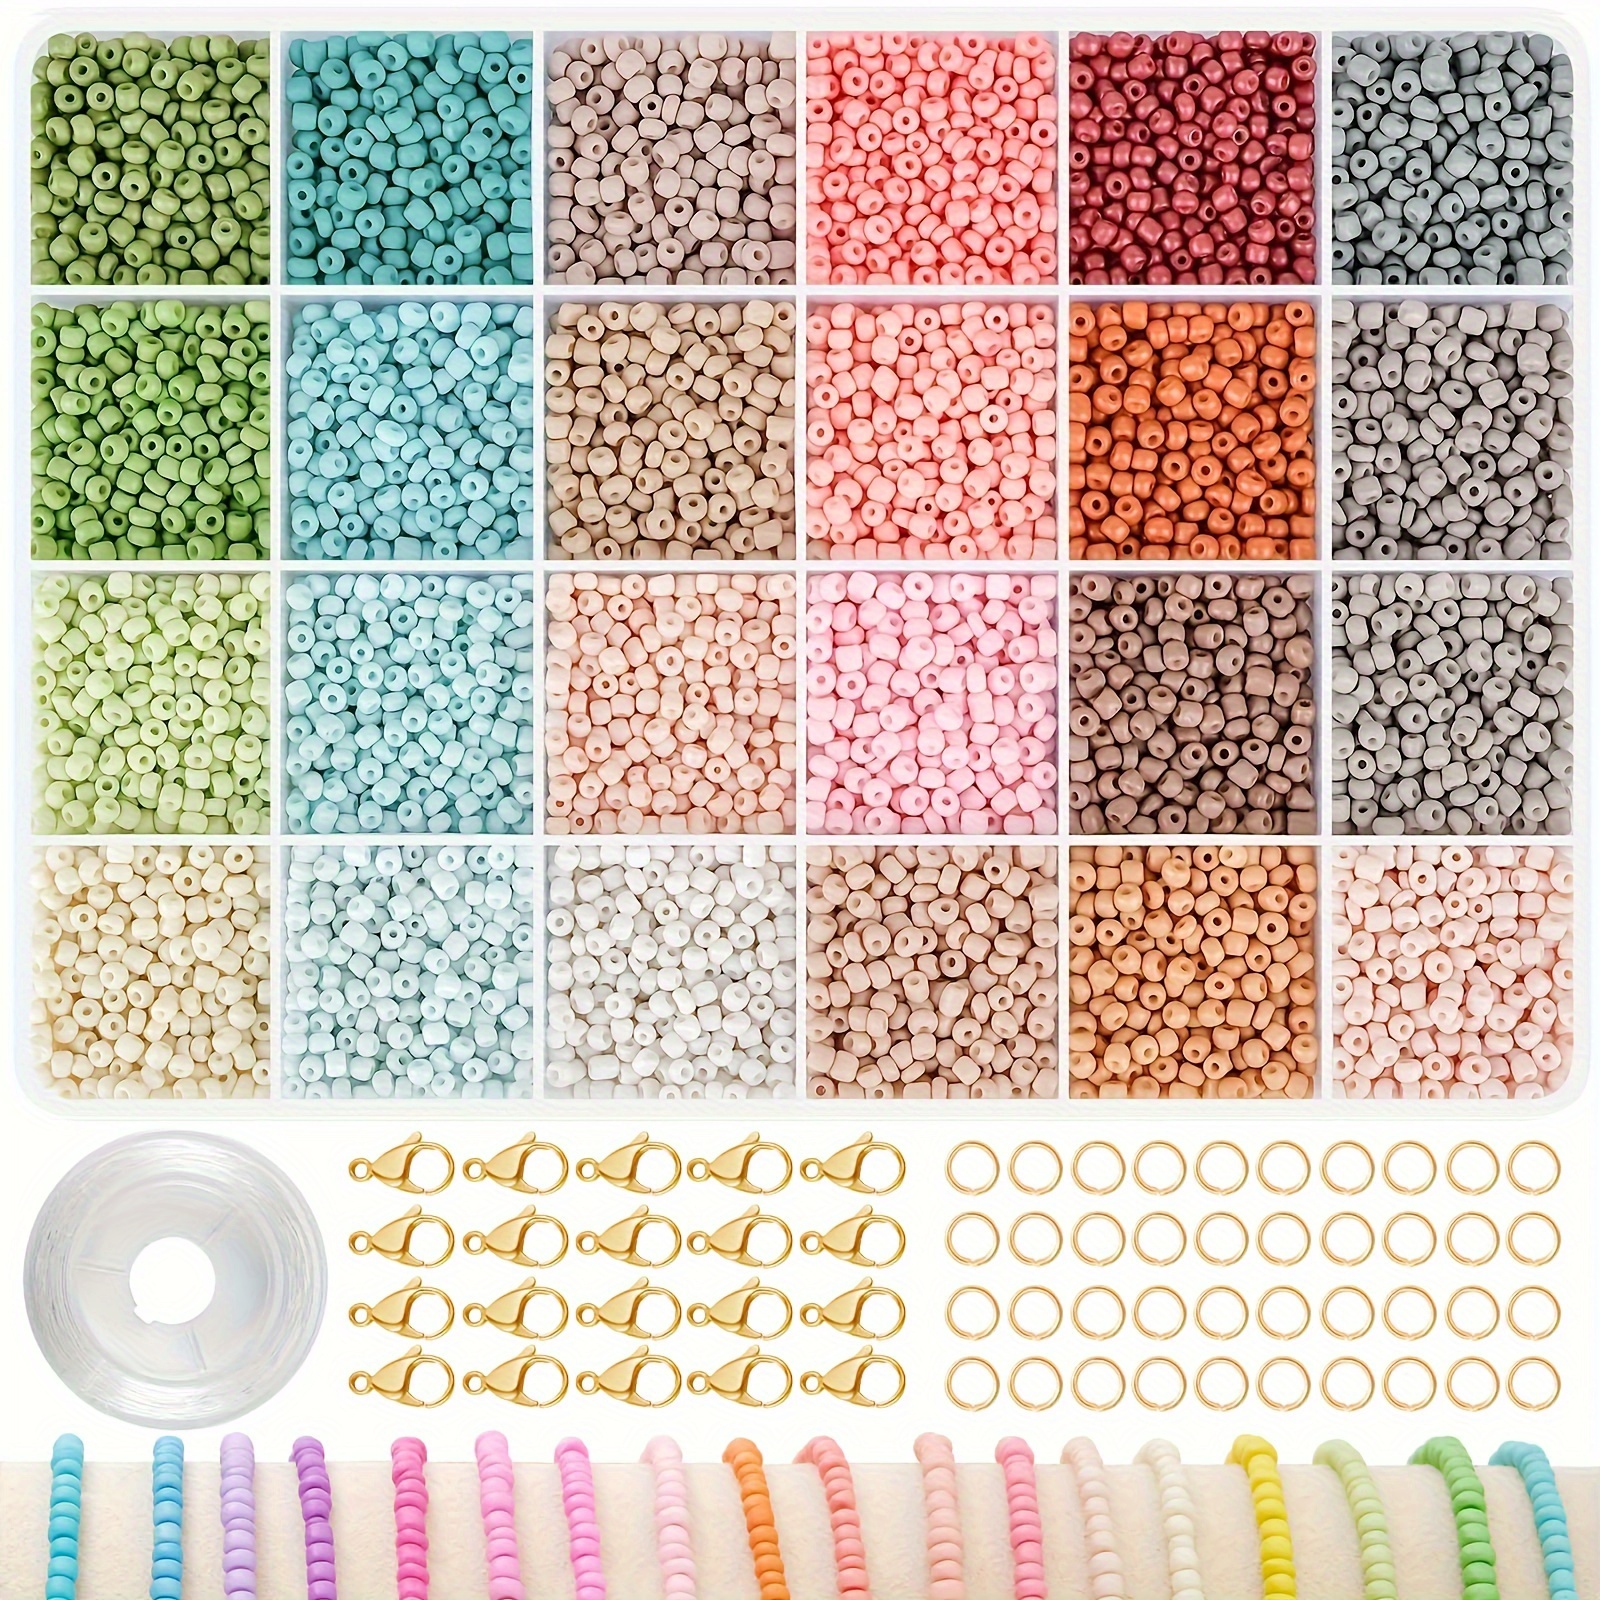 

8000pcs 3mm Colored Beads Bracelet Charm Kit For Threading Beads With Coil Lobster Clasp Circle Beads Glass Beads For Diy Jewelry Making Christmas Birthday Gift For Diy Lovers